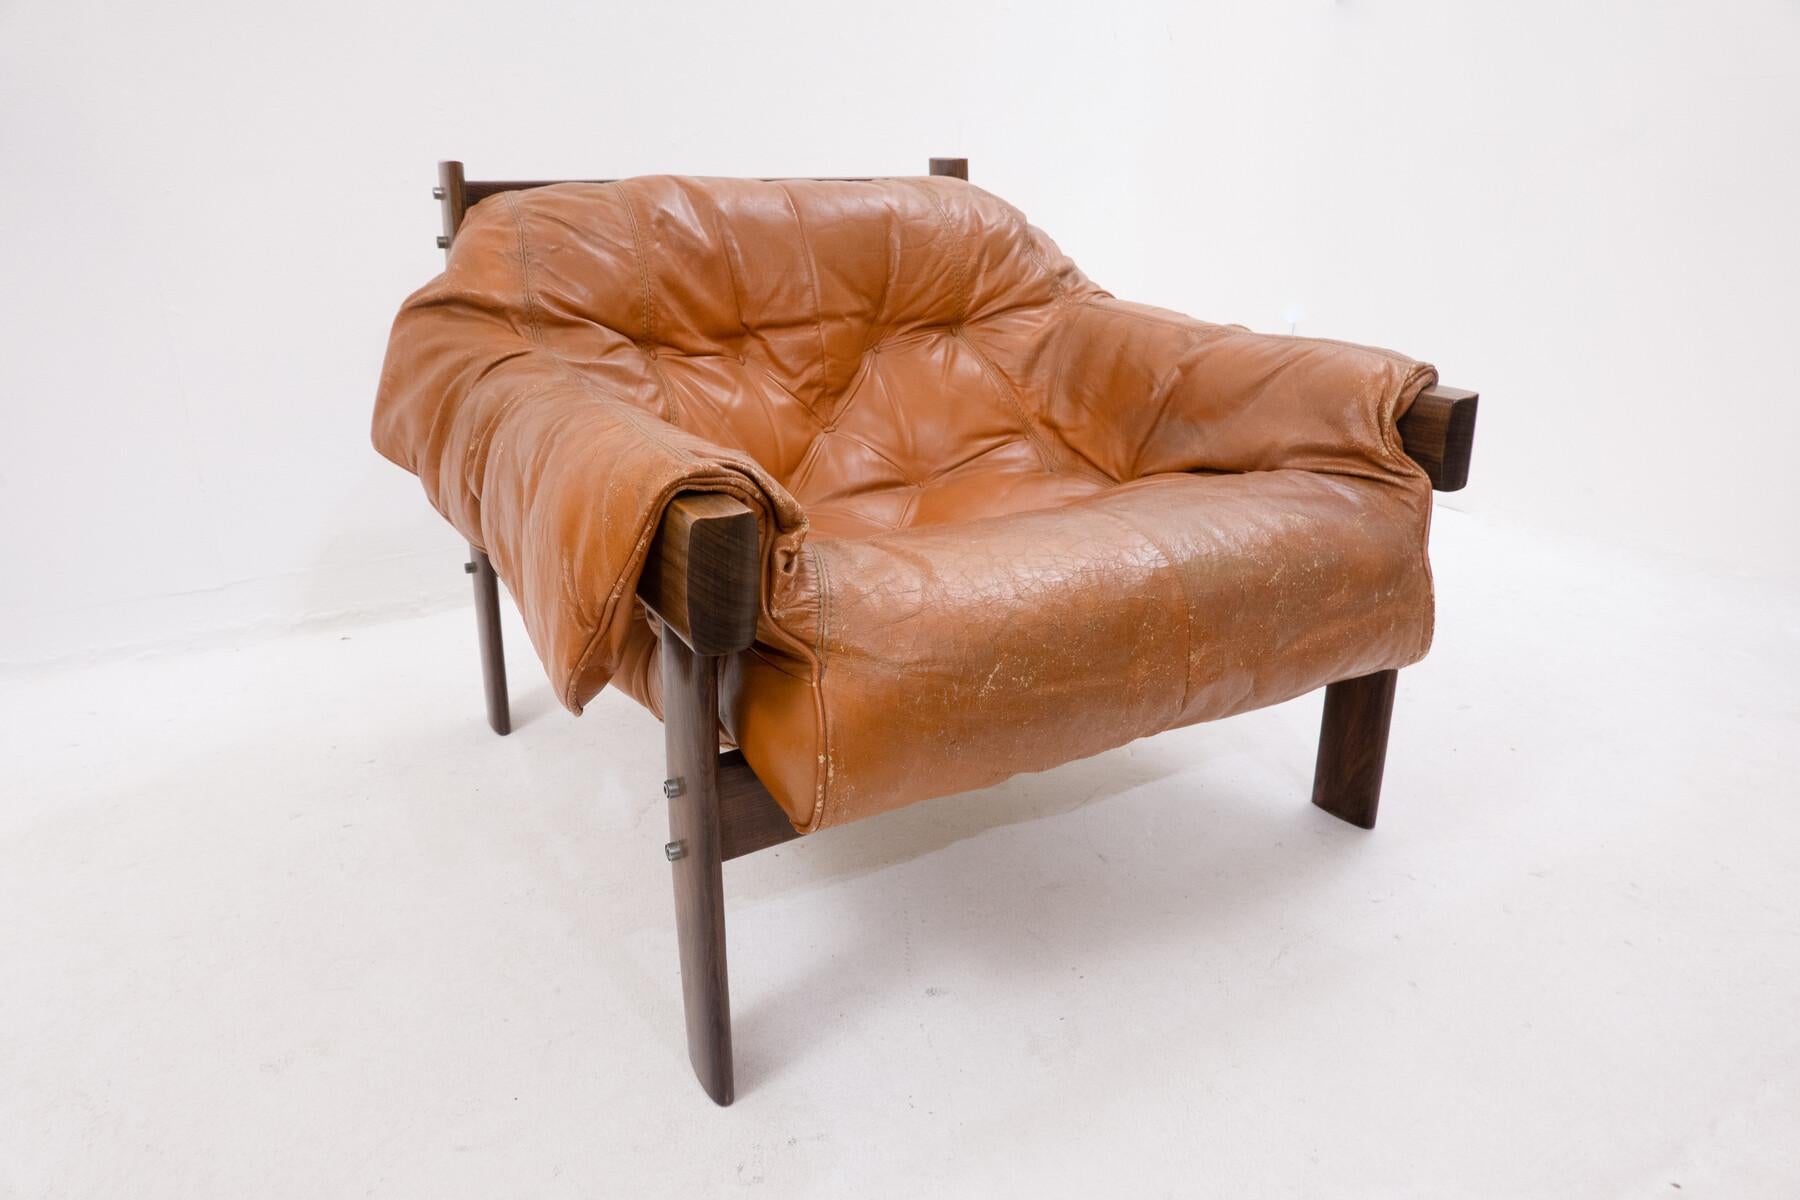 Brazilian Pair of Mid-Century Cognac Leather and Wood Lounge Chairs by Percival Lafer